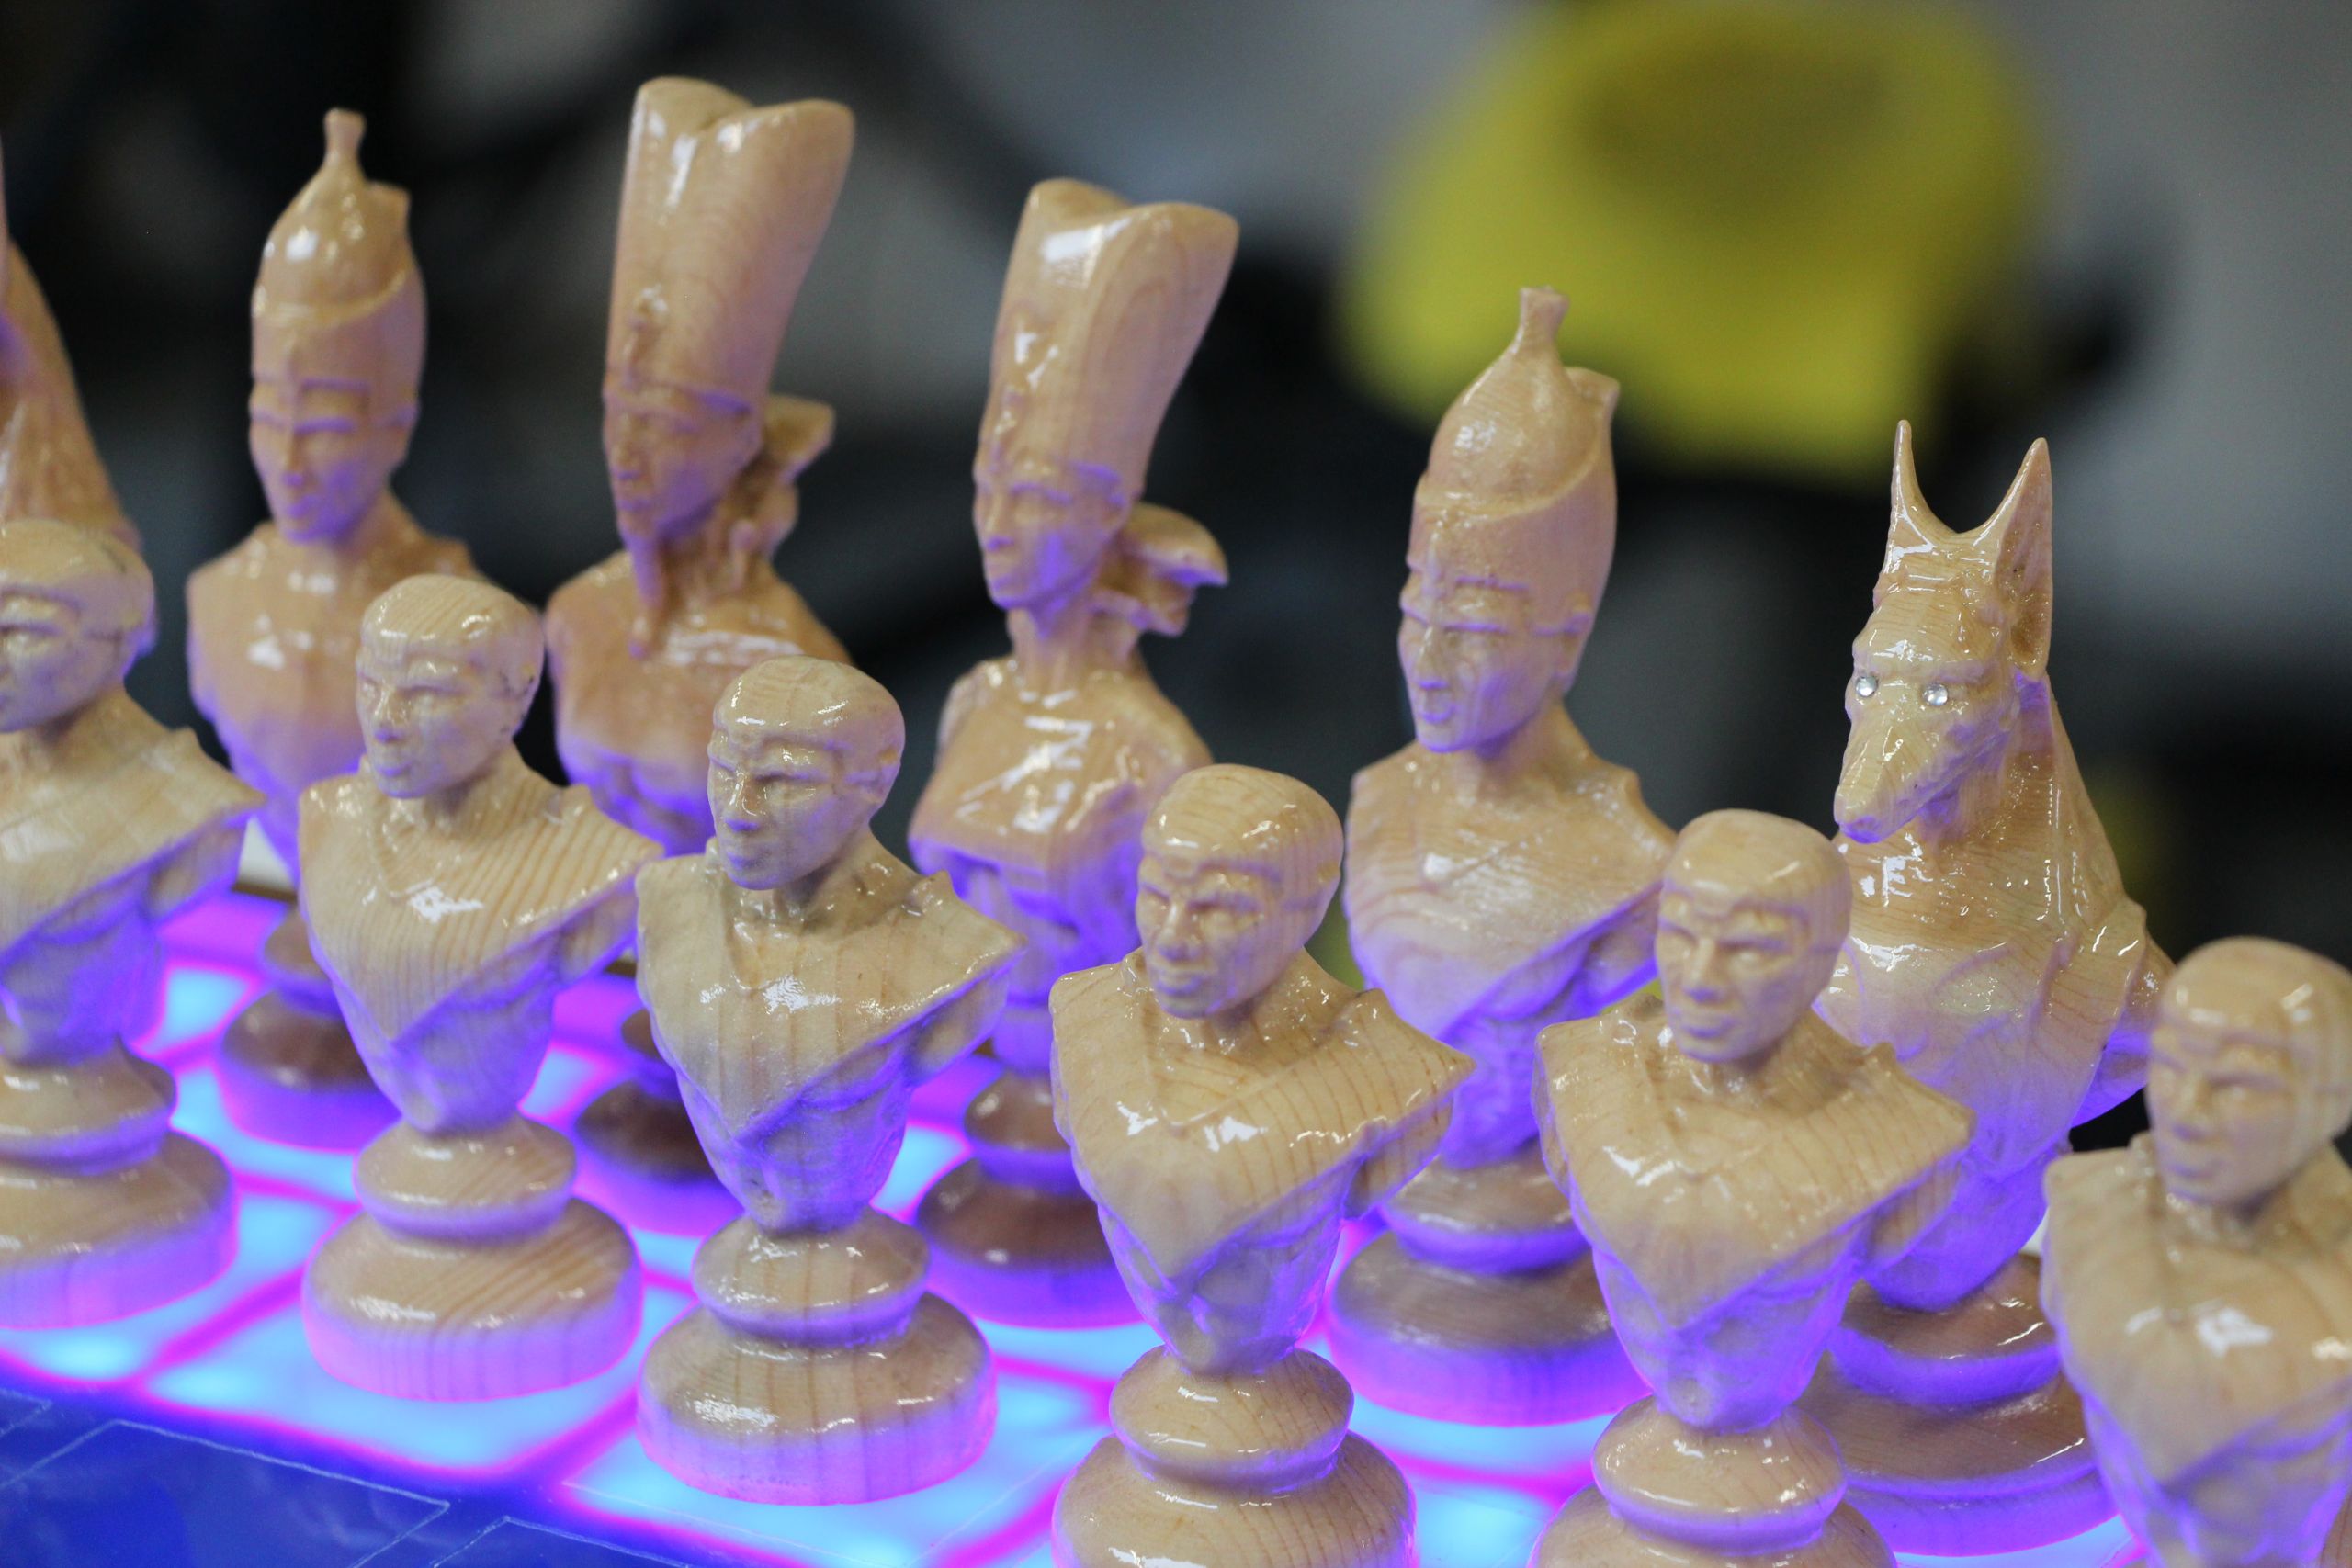 An Egyptian themed chess set carved out of pine wood with Carveco Maker. The board is lit with LED lights in each square.